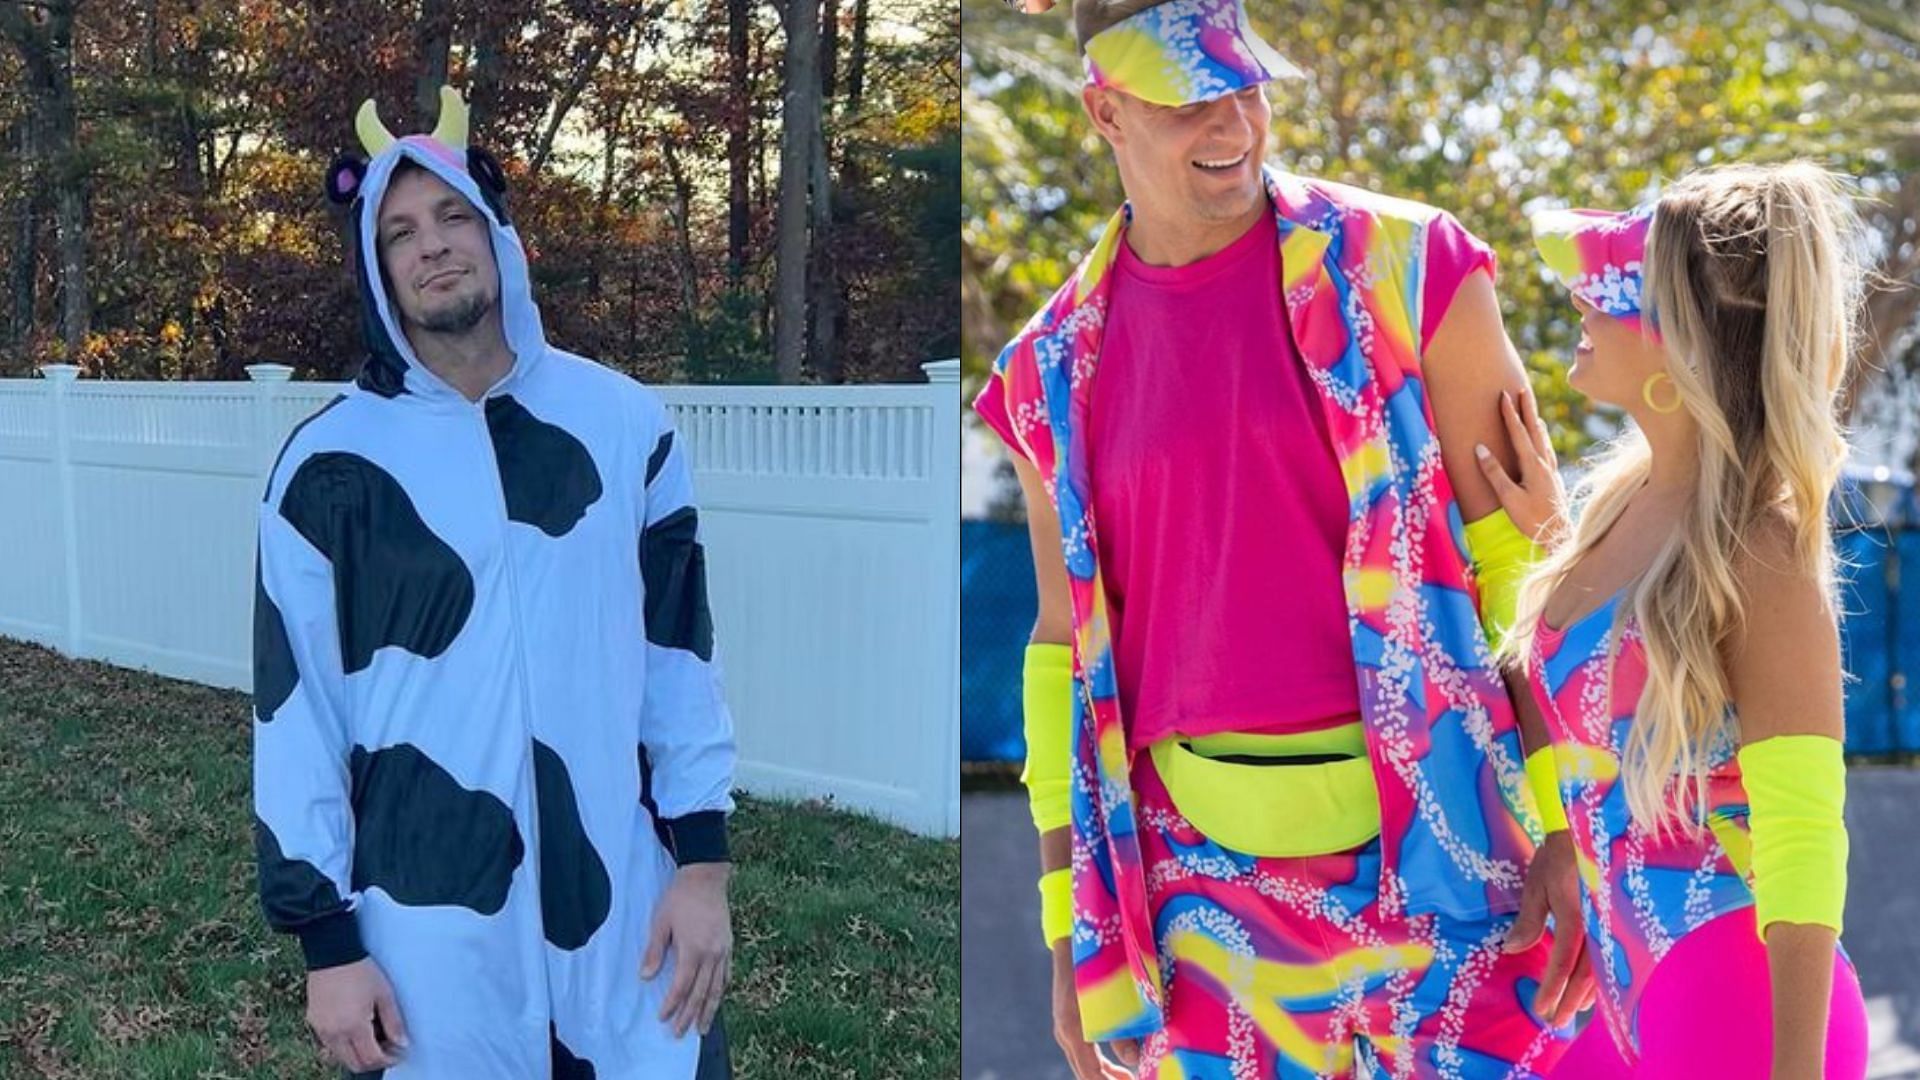 Camille Kostek helps Rob Gronkowski recreate &lsquo;legendary&rsquo; Halloween outfit